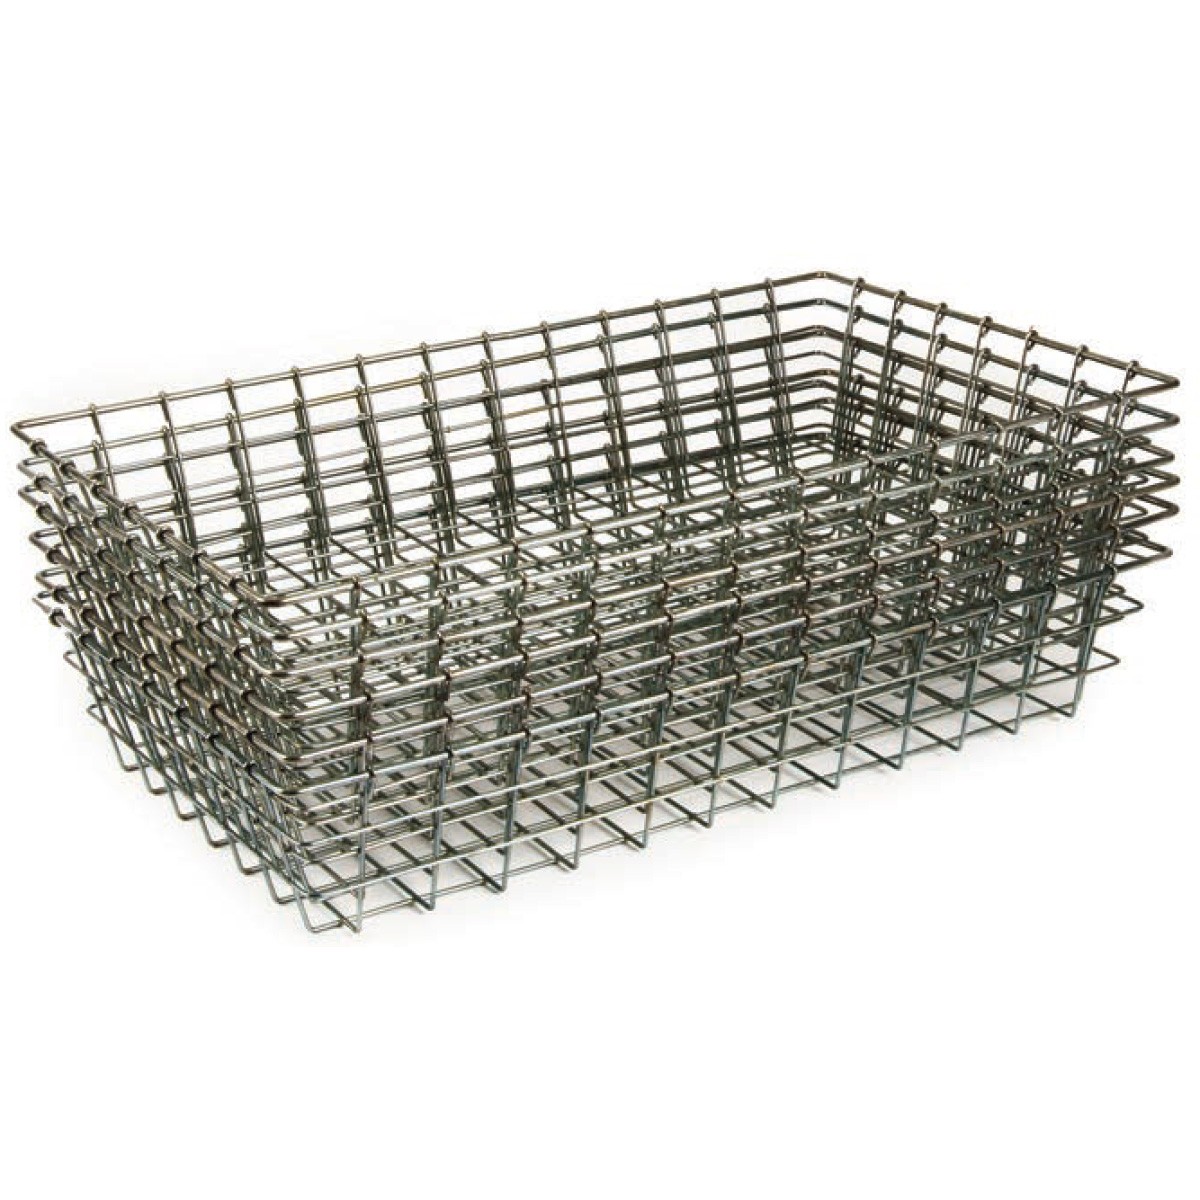 Freezer Baskets - Industrial and Commercial Freezer Baskets for